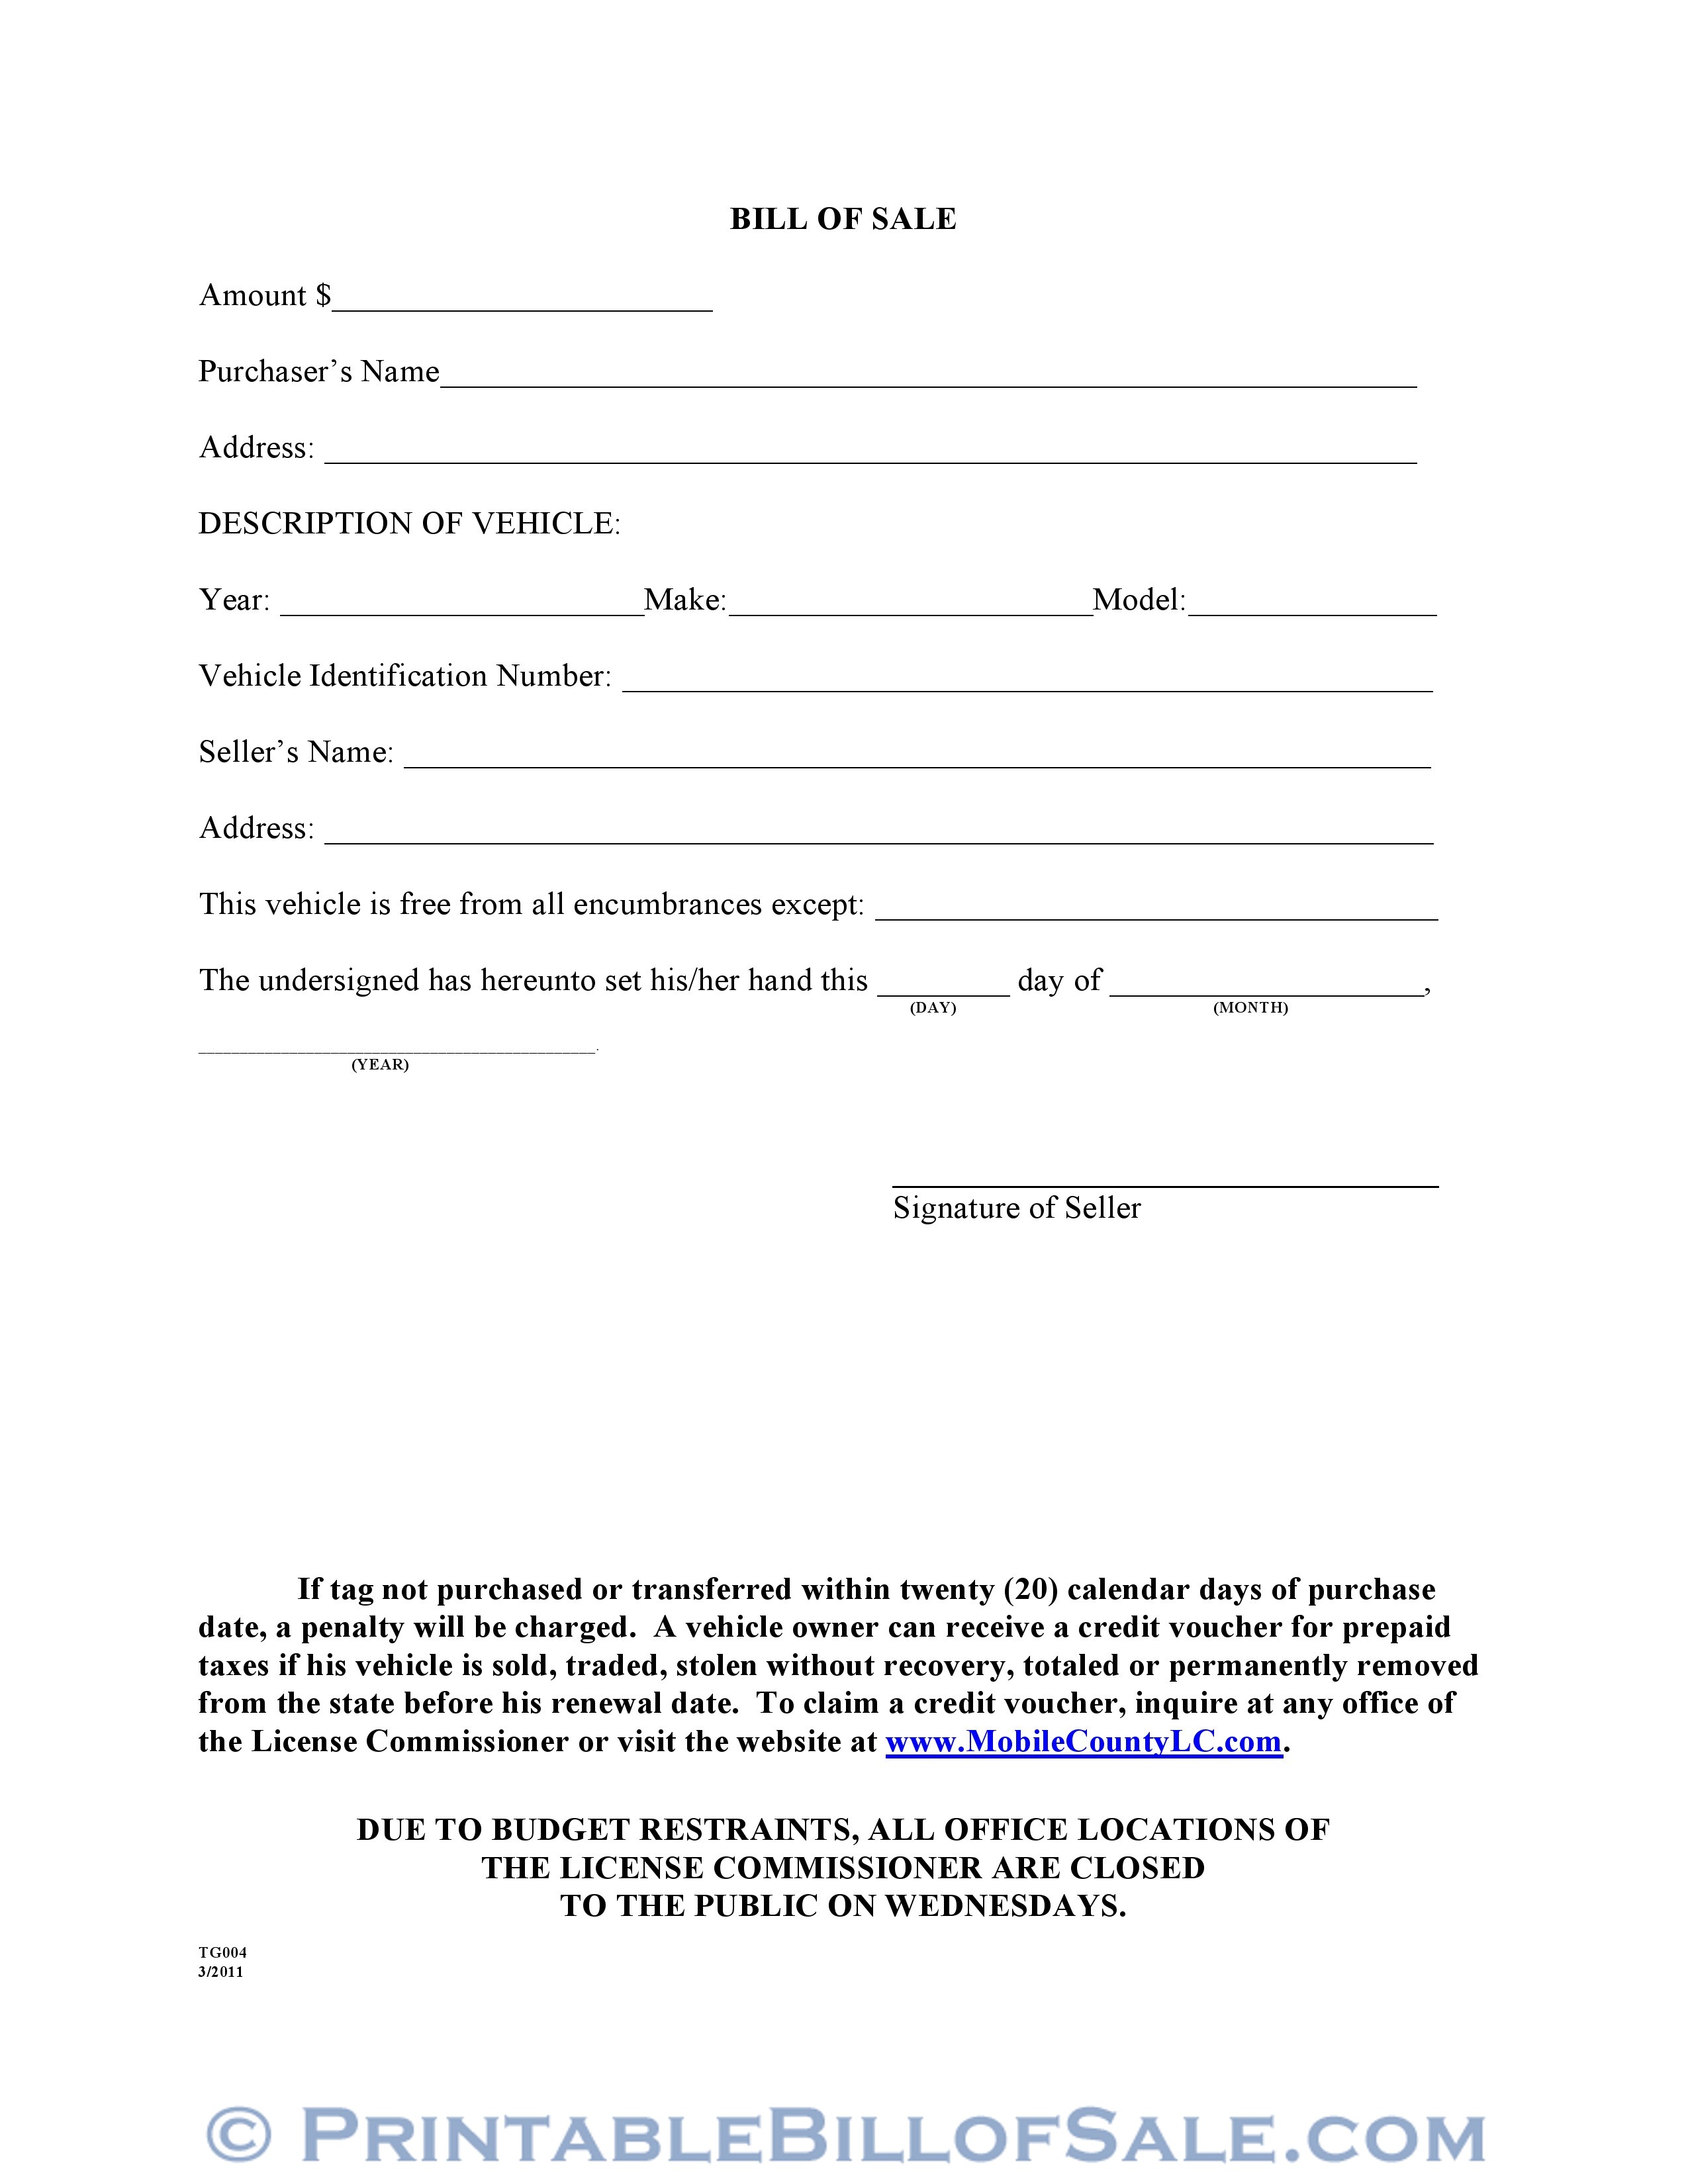 Free Mobile County Alabama Motor Vehicle Bill of Sale Form TG004